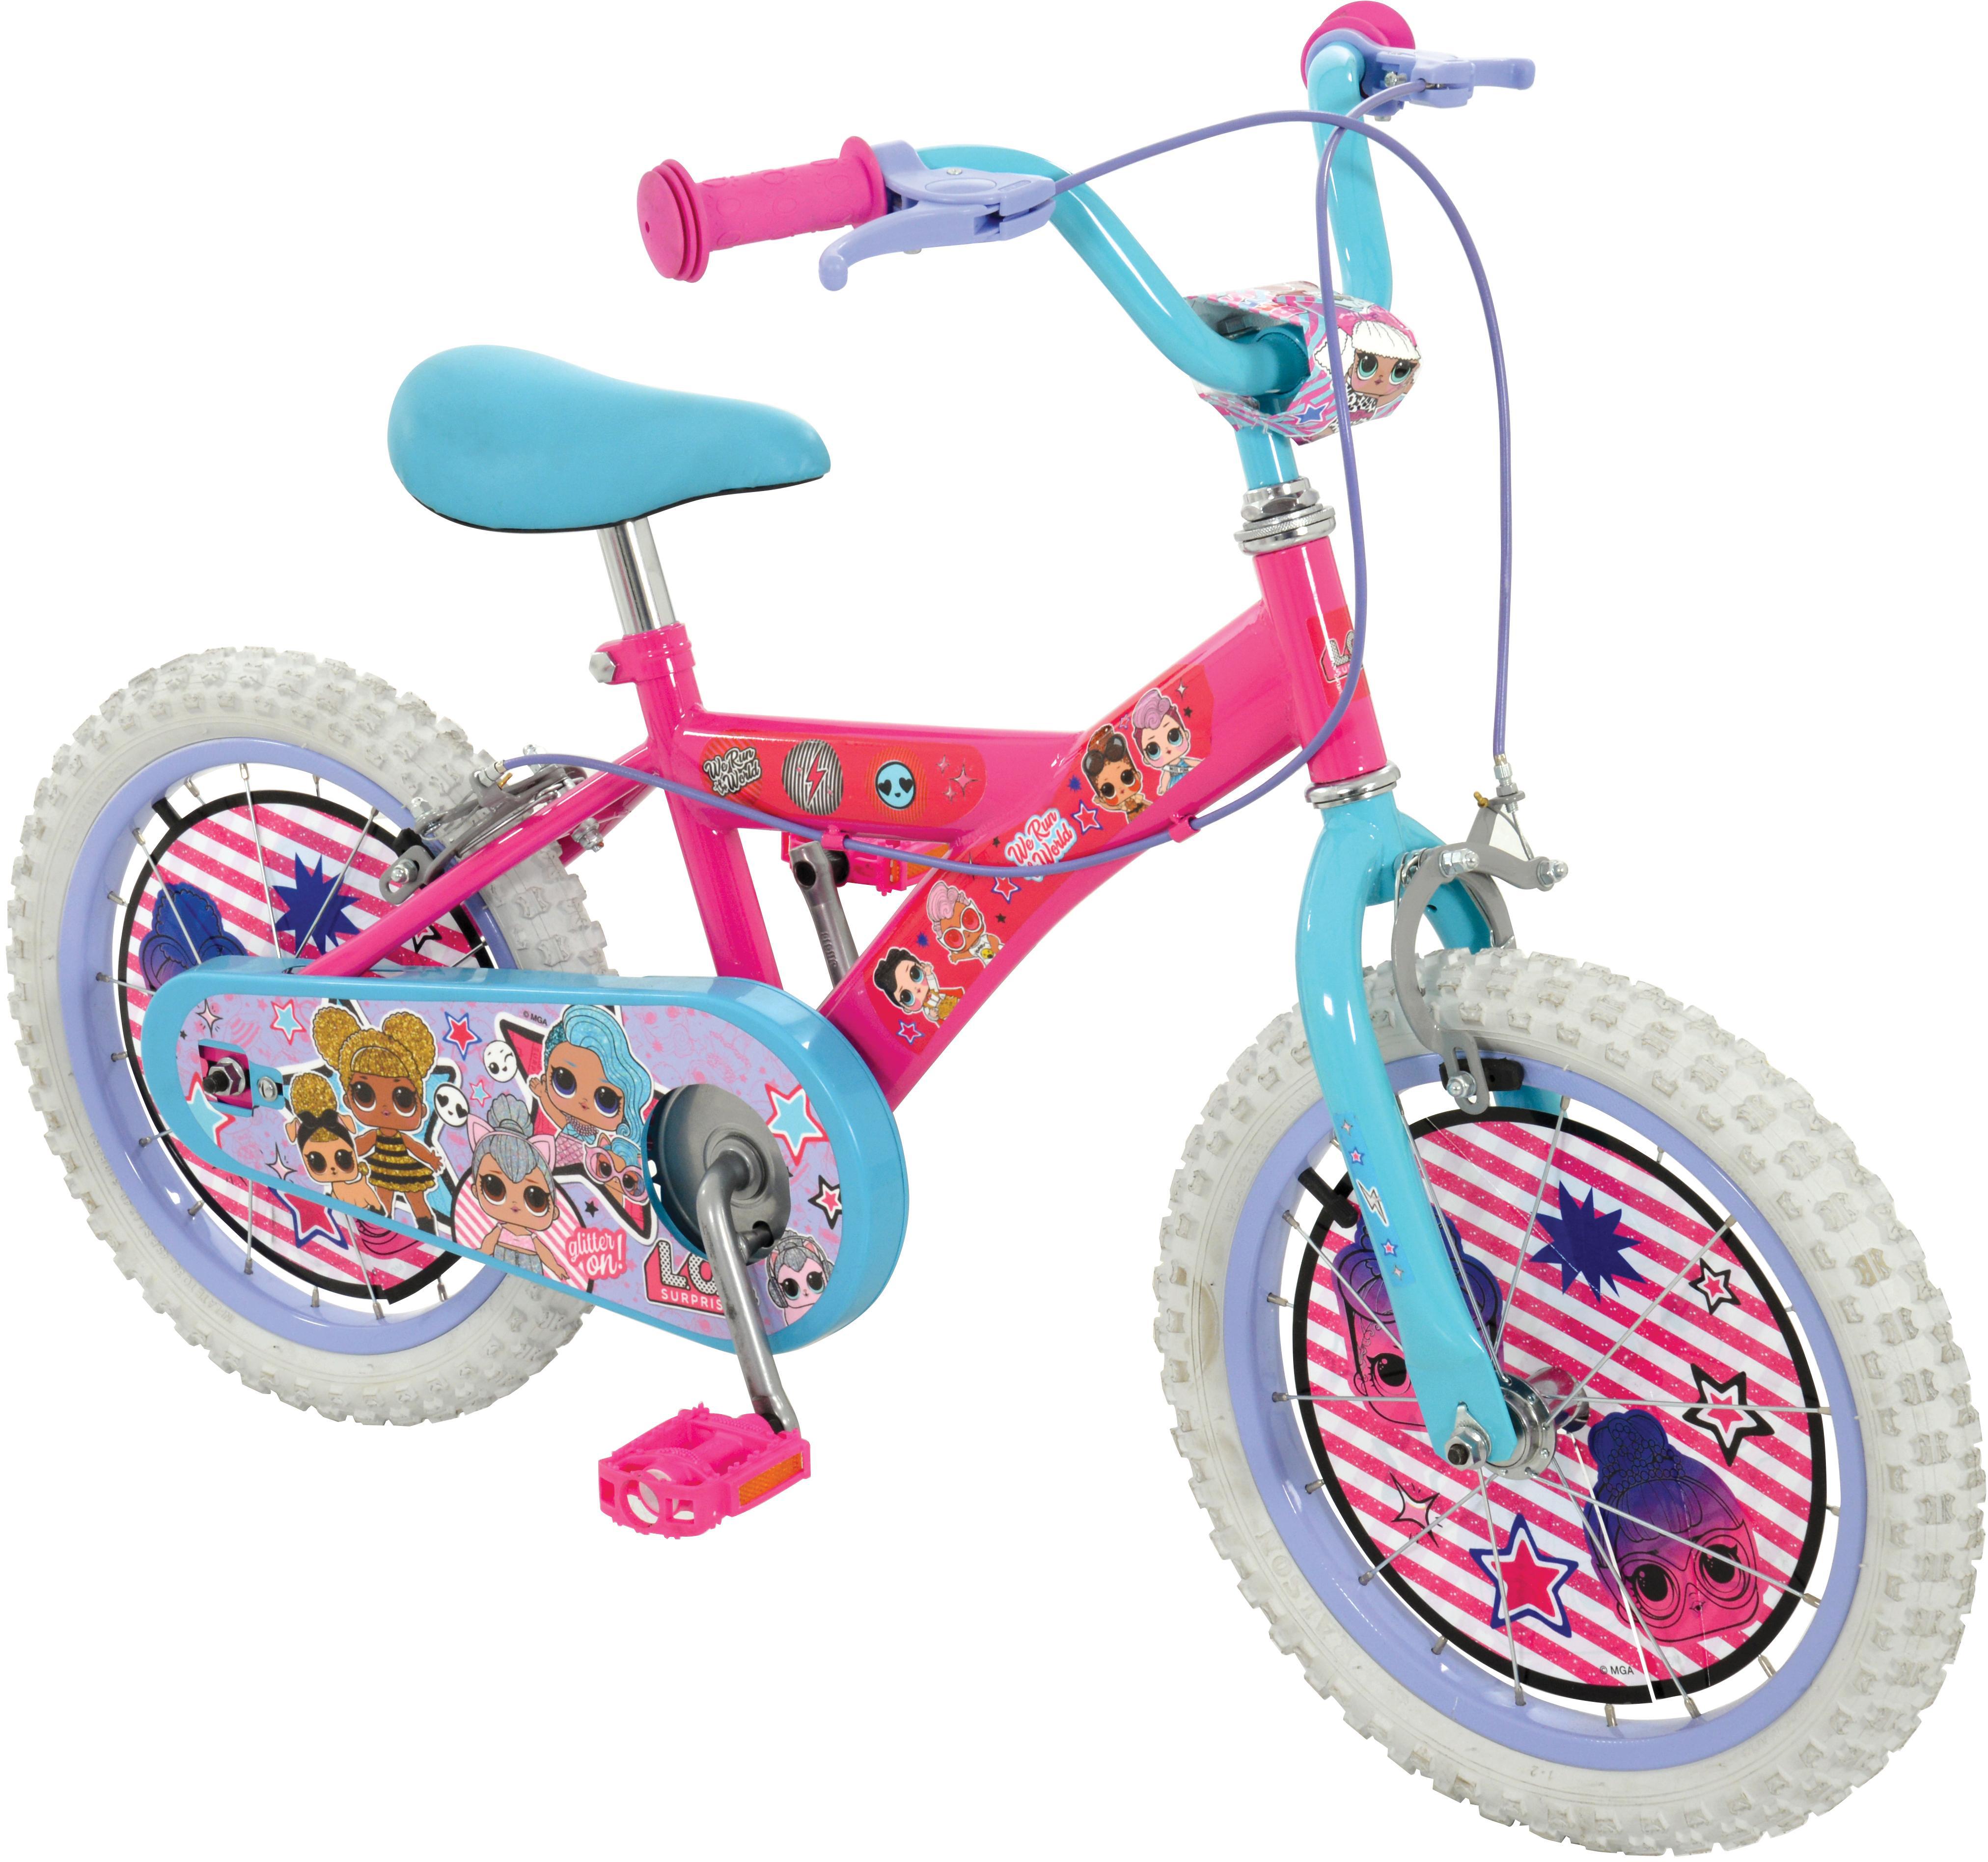 lol bicycle with training wheels